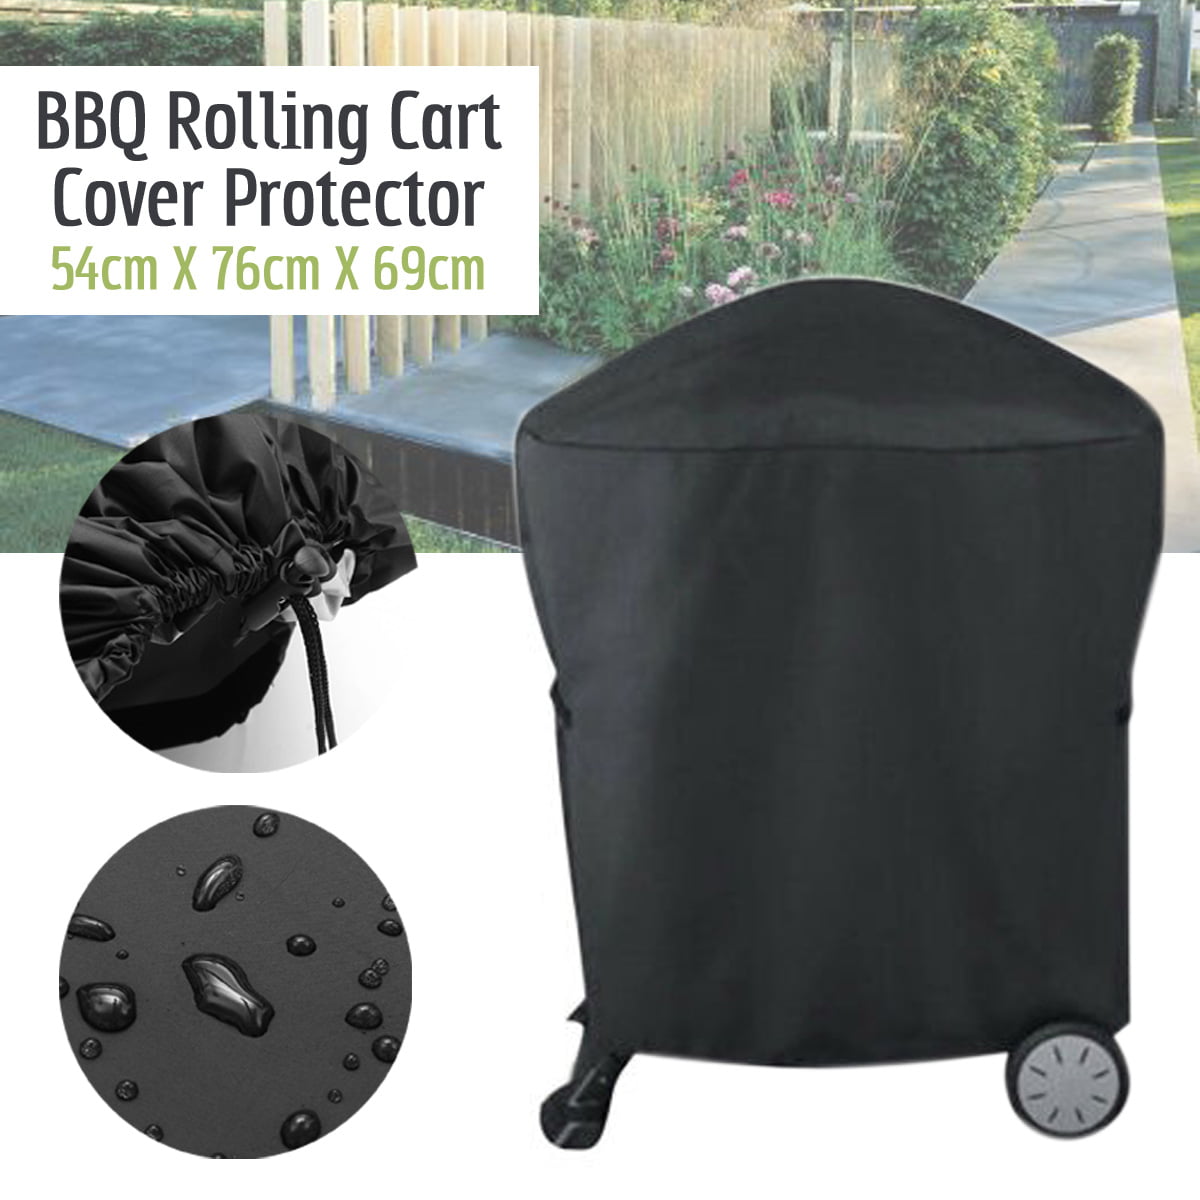 Garden Outdoor Kettle Heavy Duty BBQ Cover Waterproof Barbecue Grill Protector 